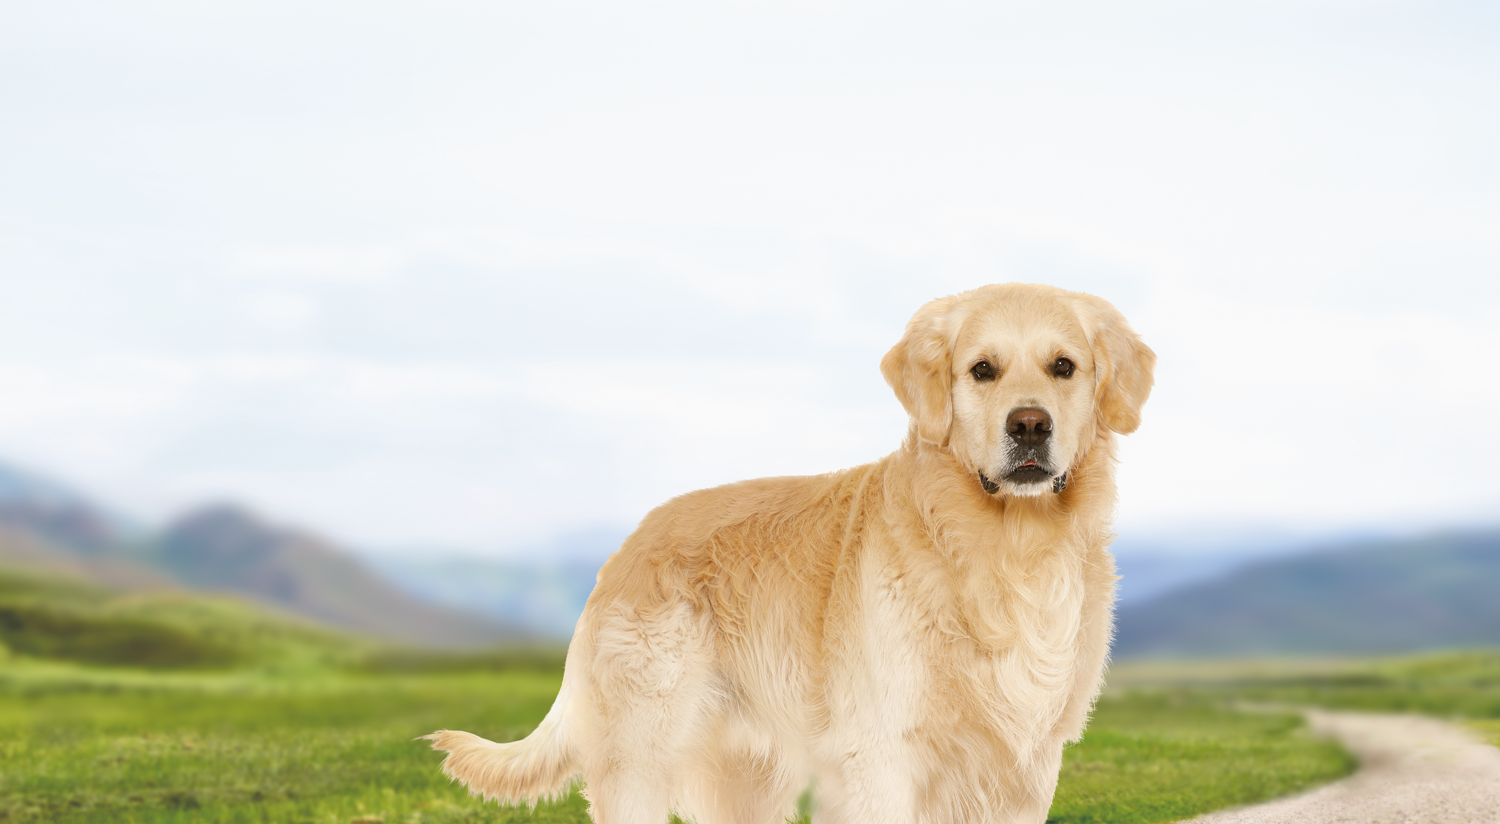 Dry dog food for adult Golden Retrievers